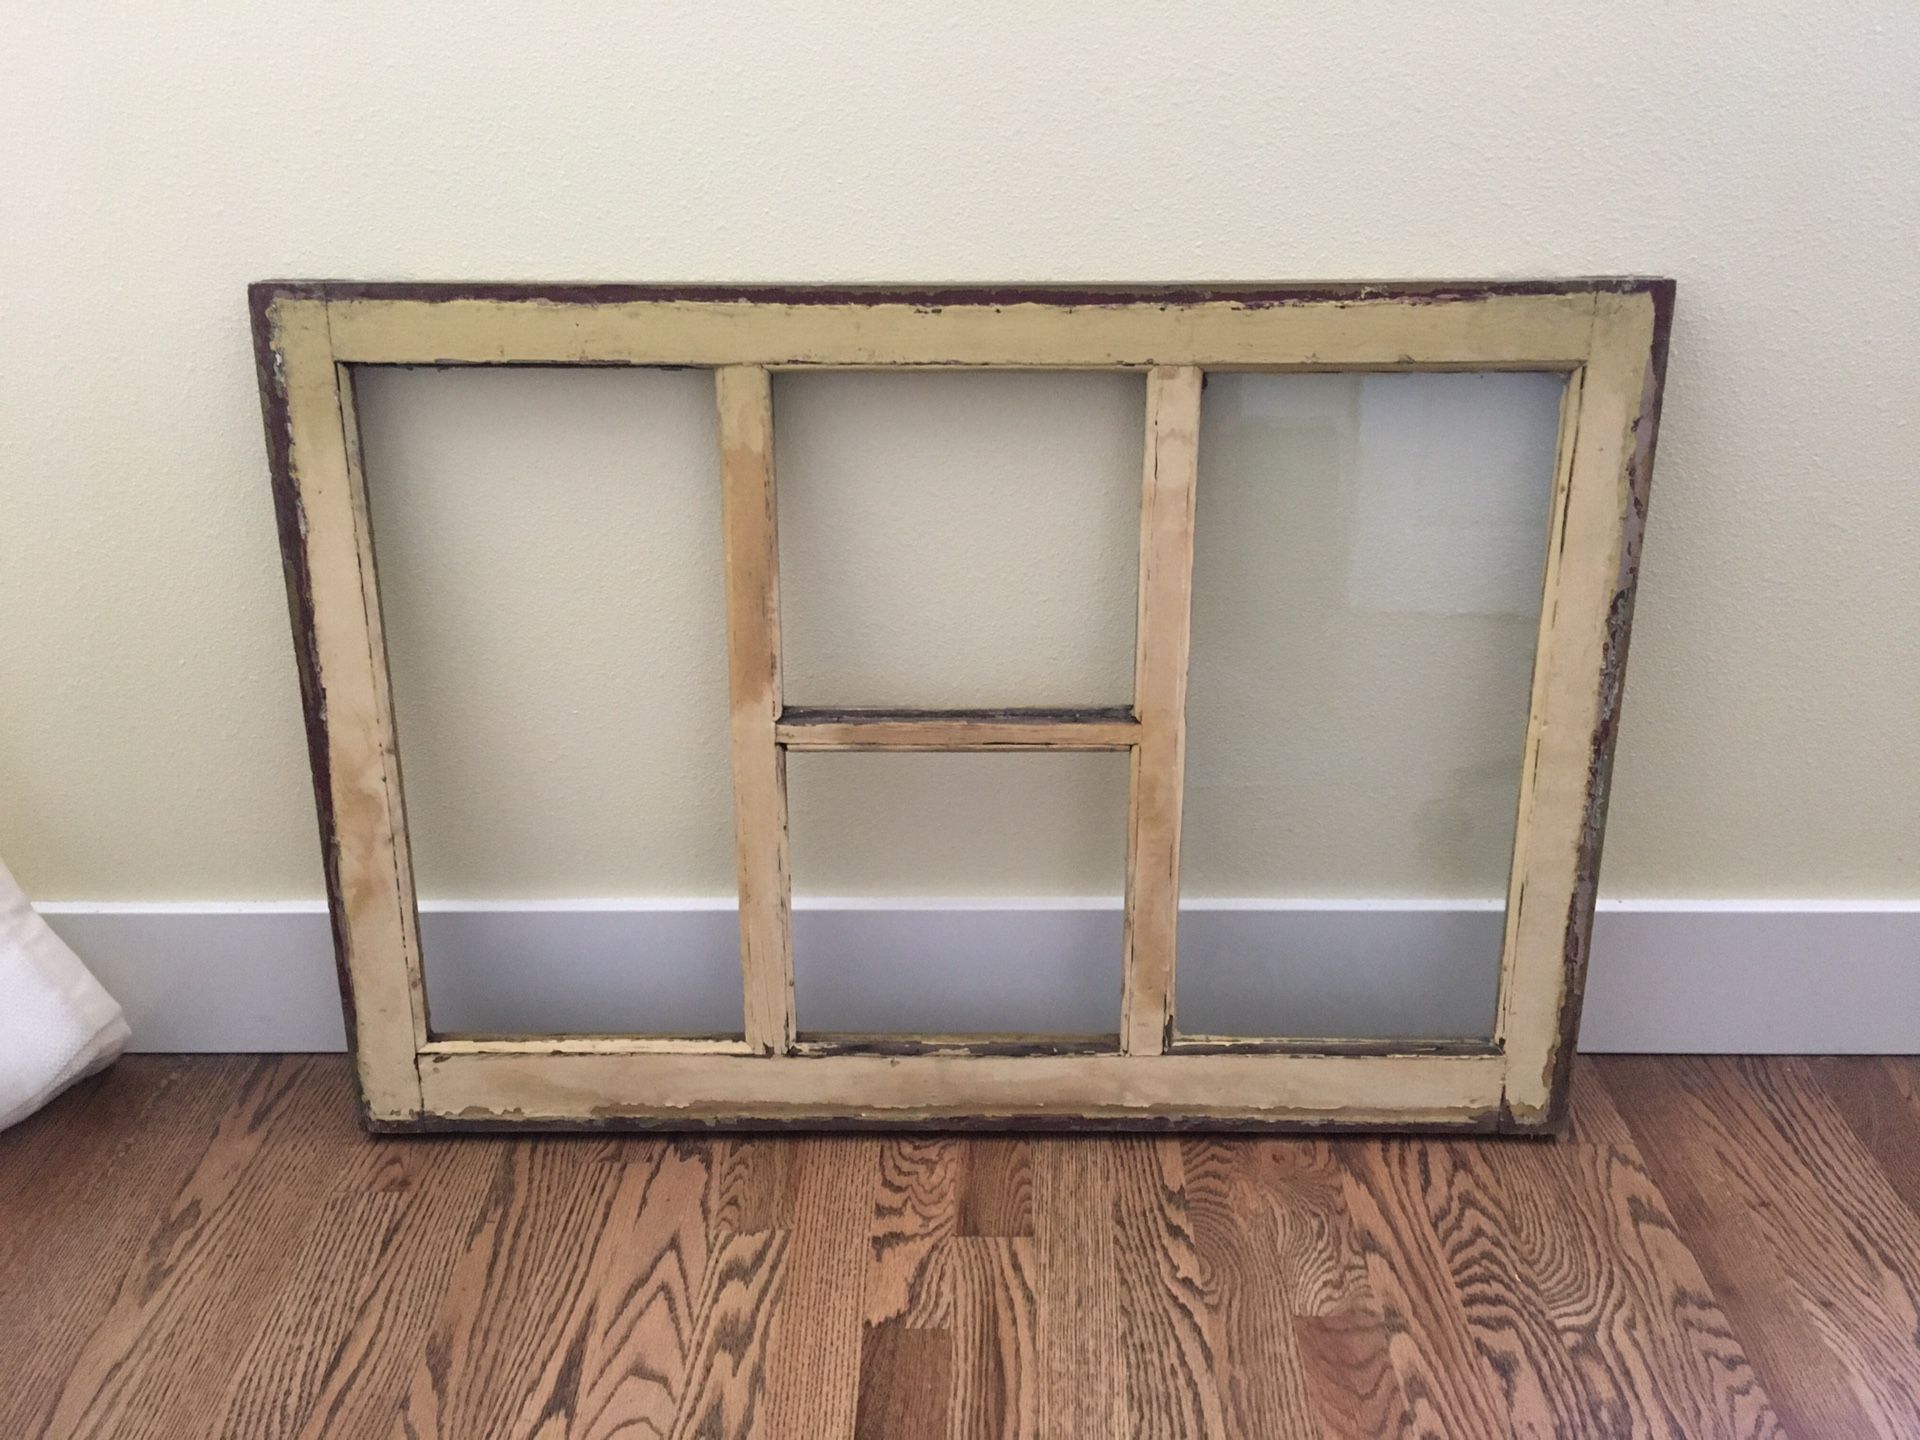 Old Rustic Window for Art or Decor